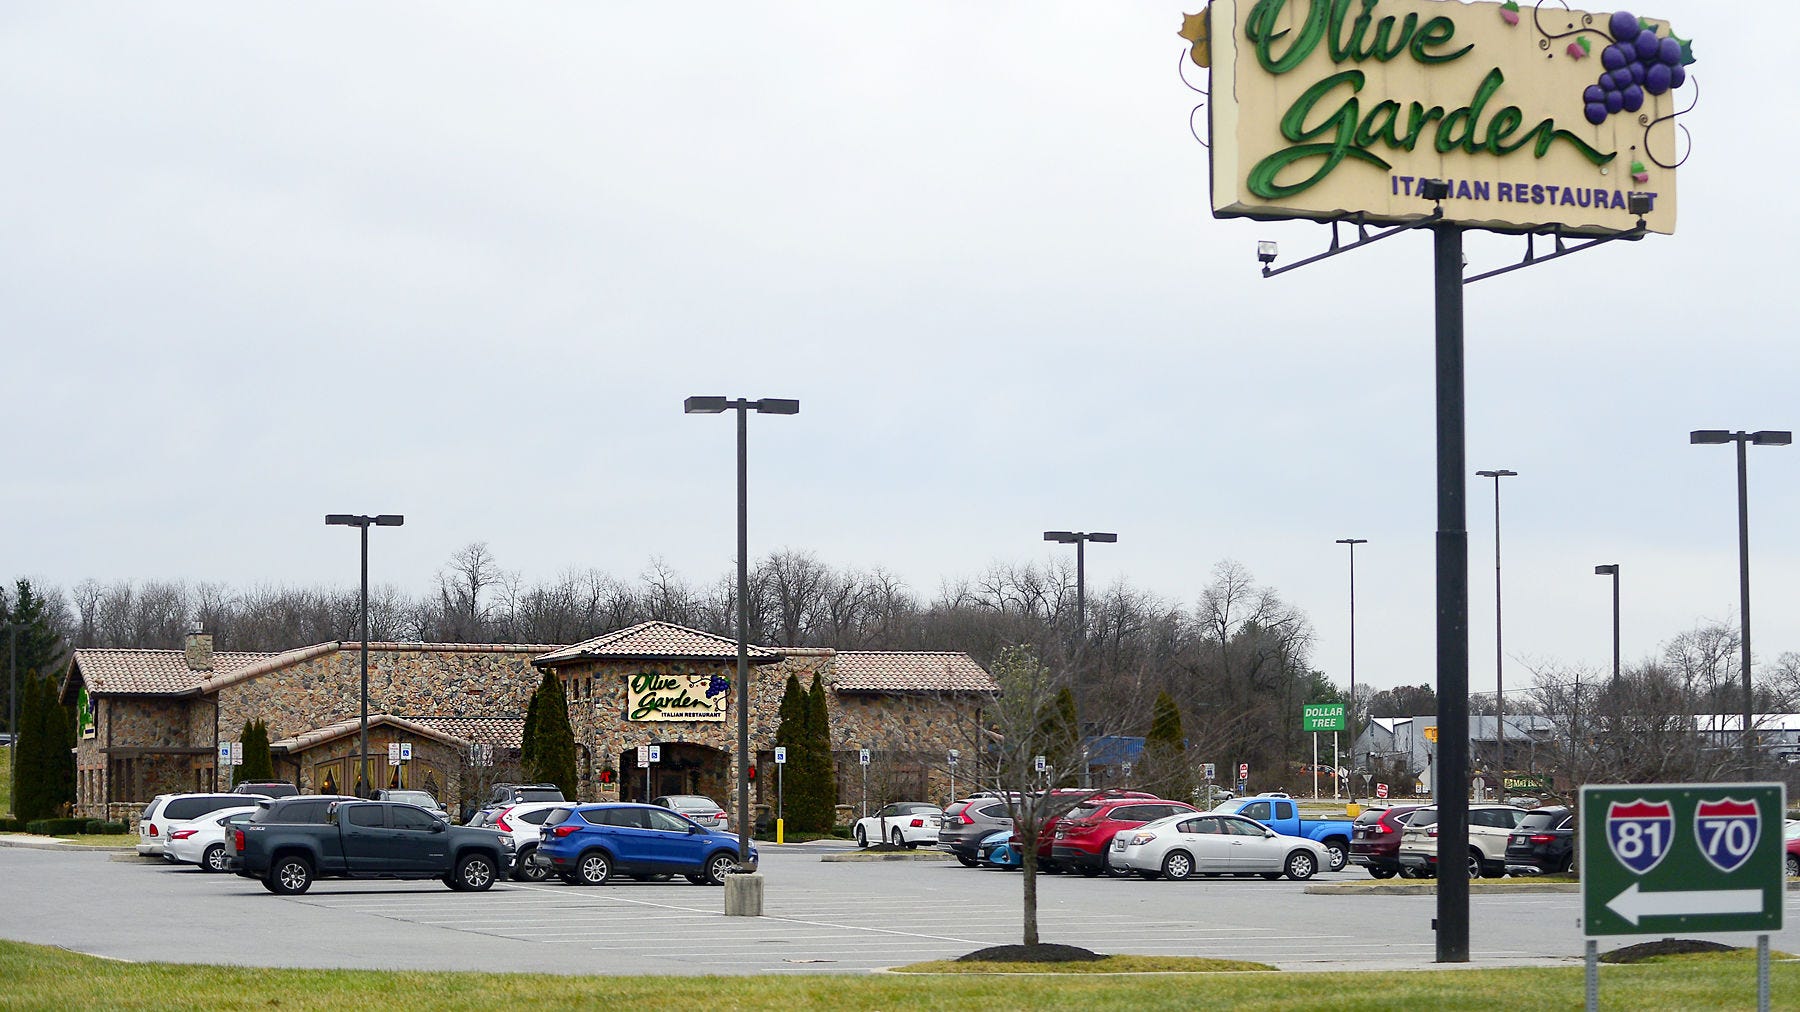 Gadsden City Council Approves Hearing On Tax Rebate For Olive Garden